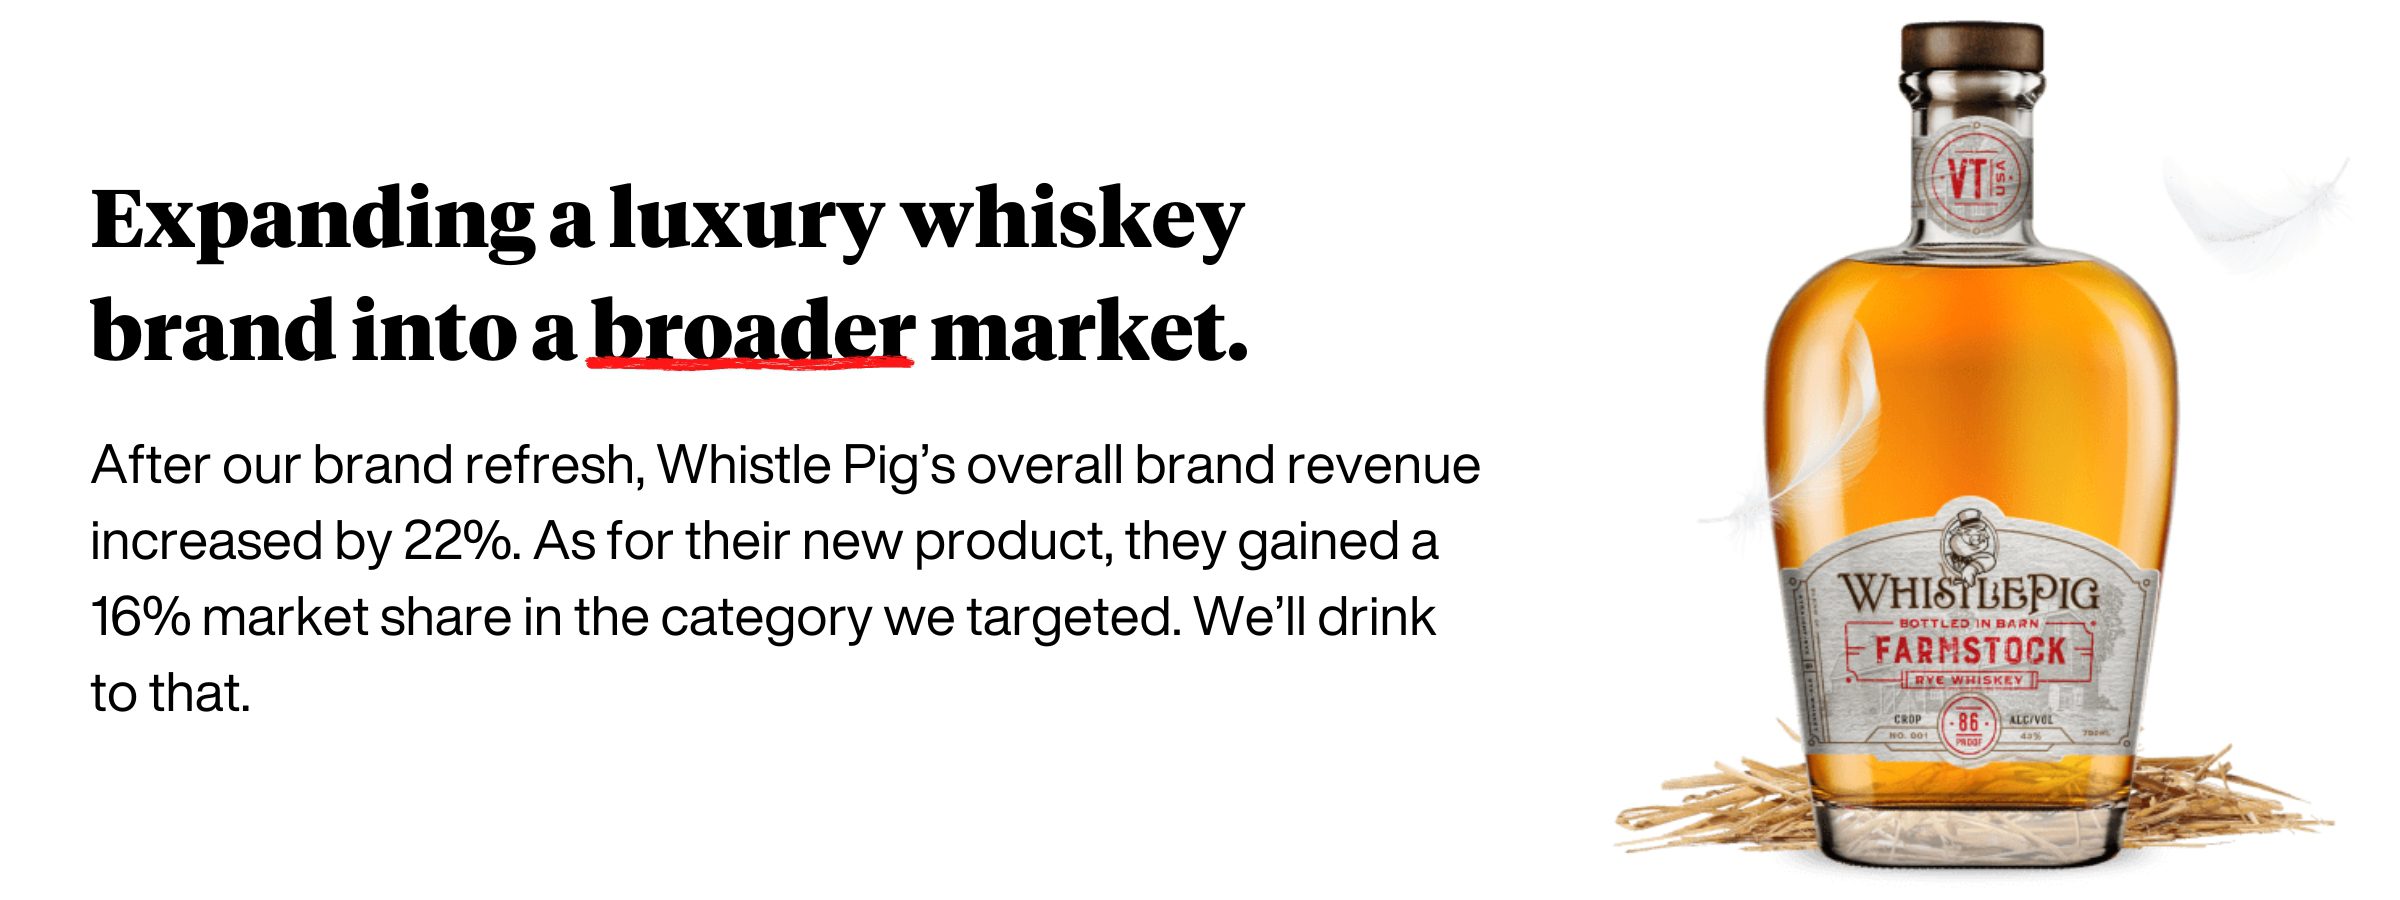 After our brand refresh, Whistle Pig’s overall brand revenue increased by 22%. As for their new product, they gained a 16% market share in the category we targeted. We’ll drink to that.